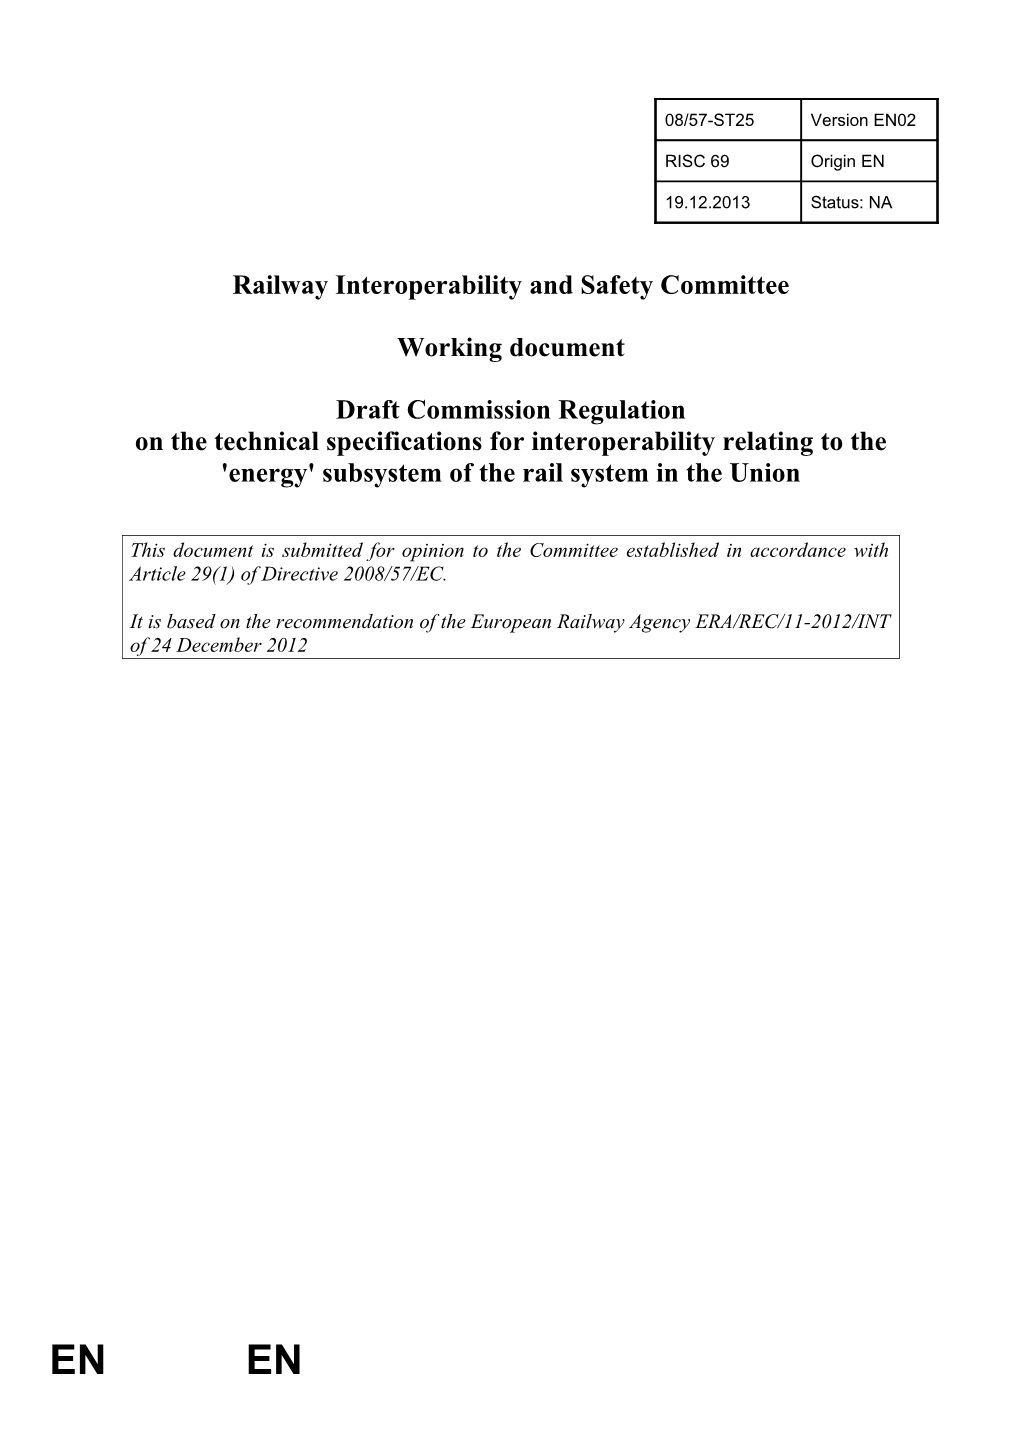 Railway Interoperability and Safety Committee